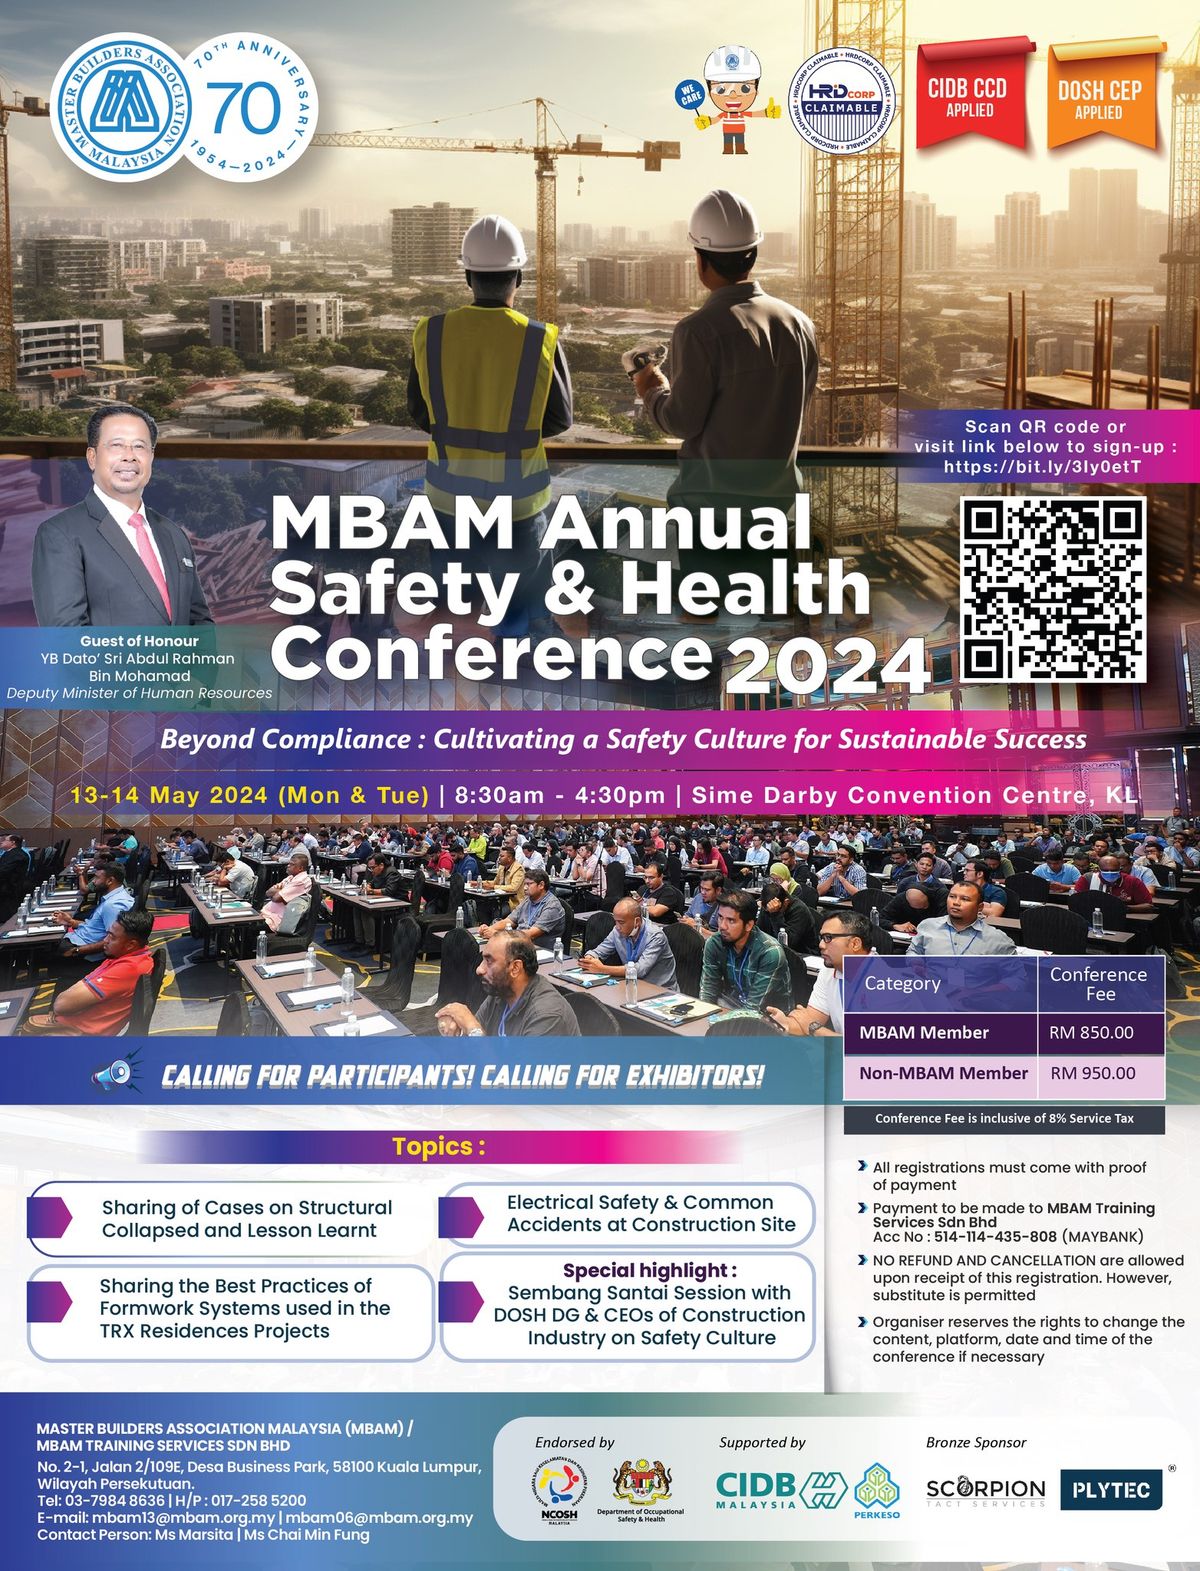 MBAM Annual Safety & Health Conference 2024